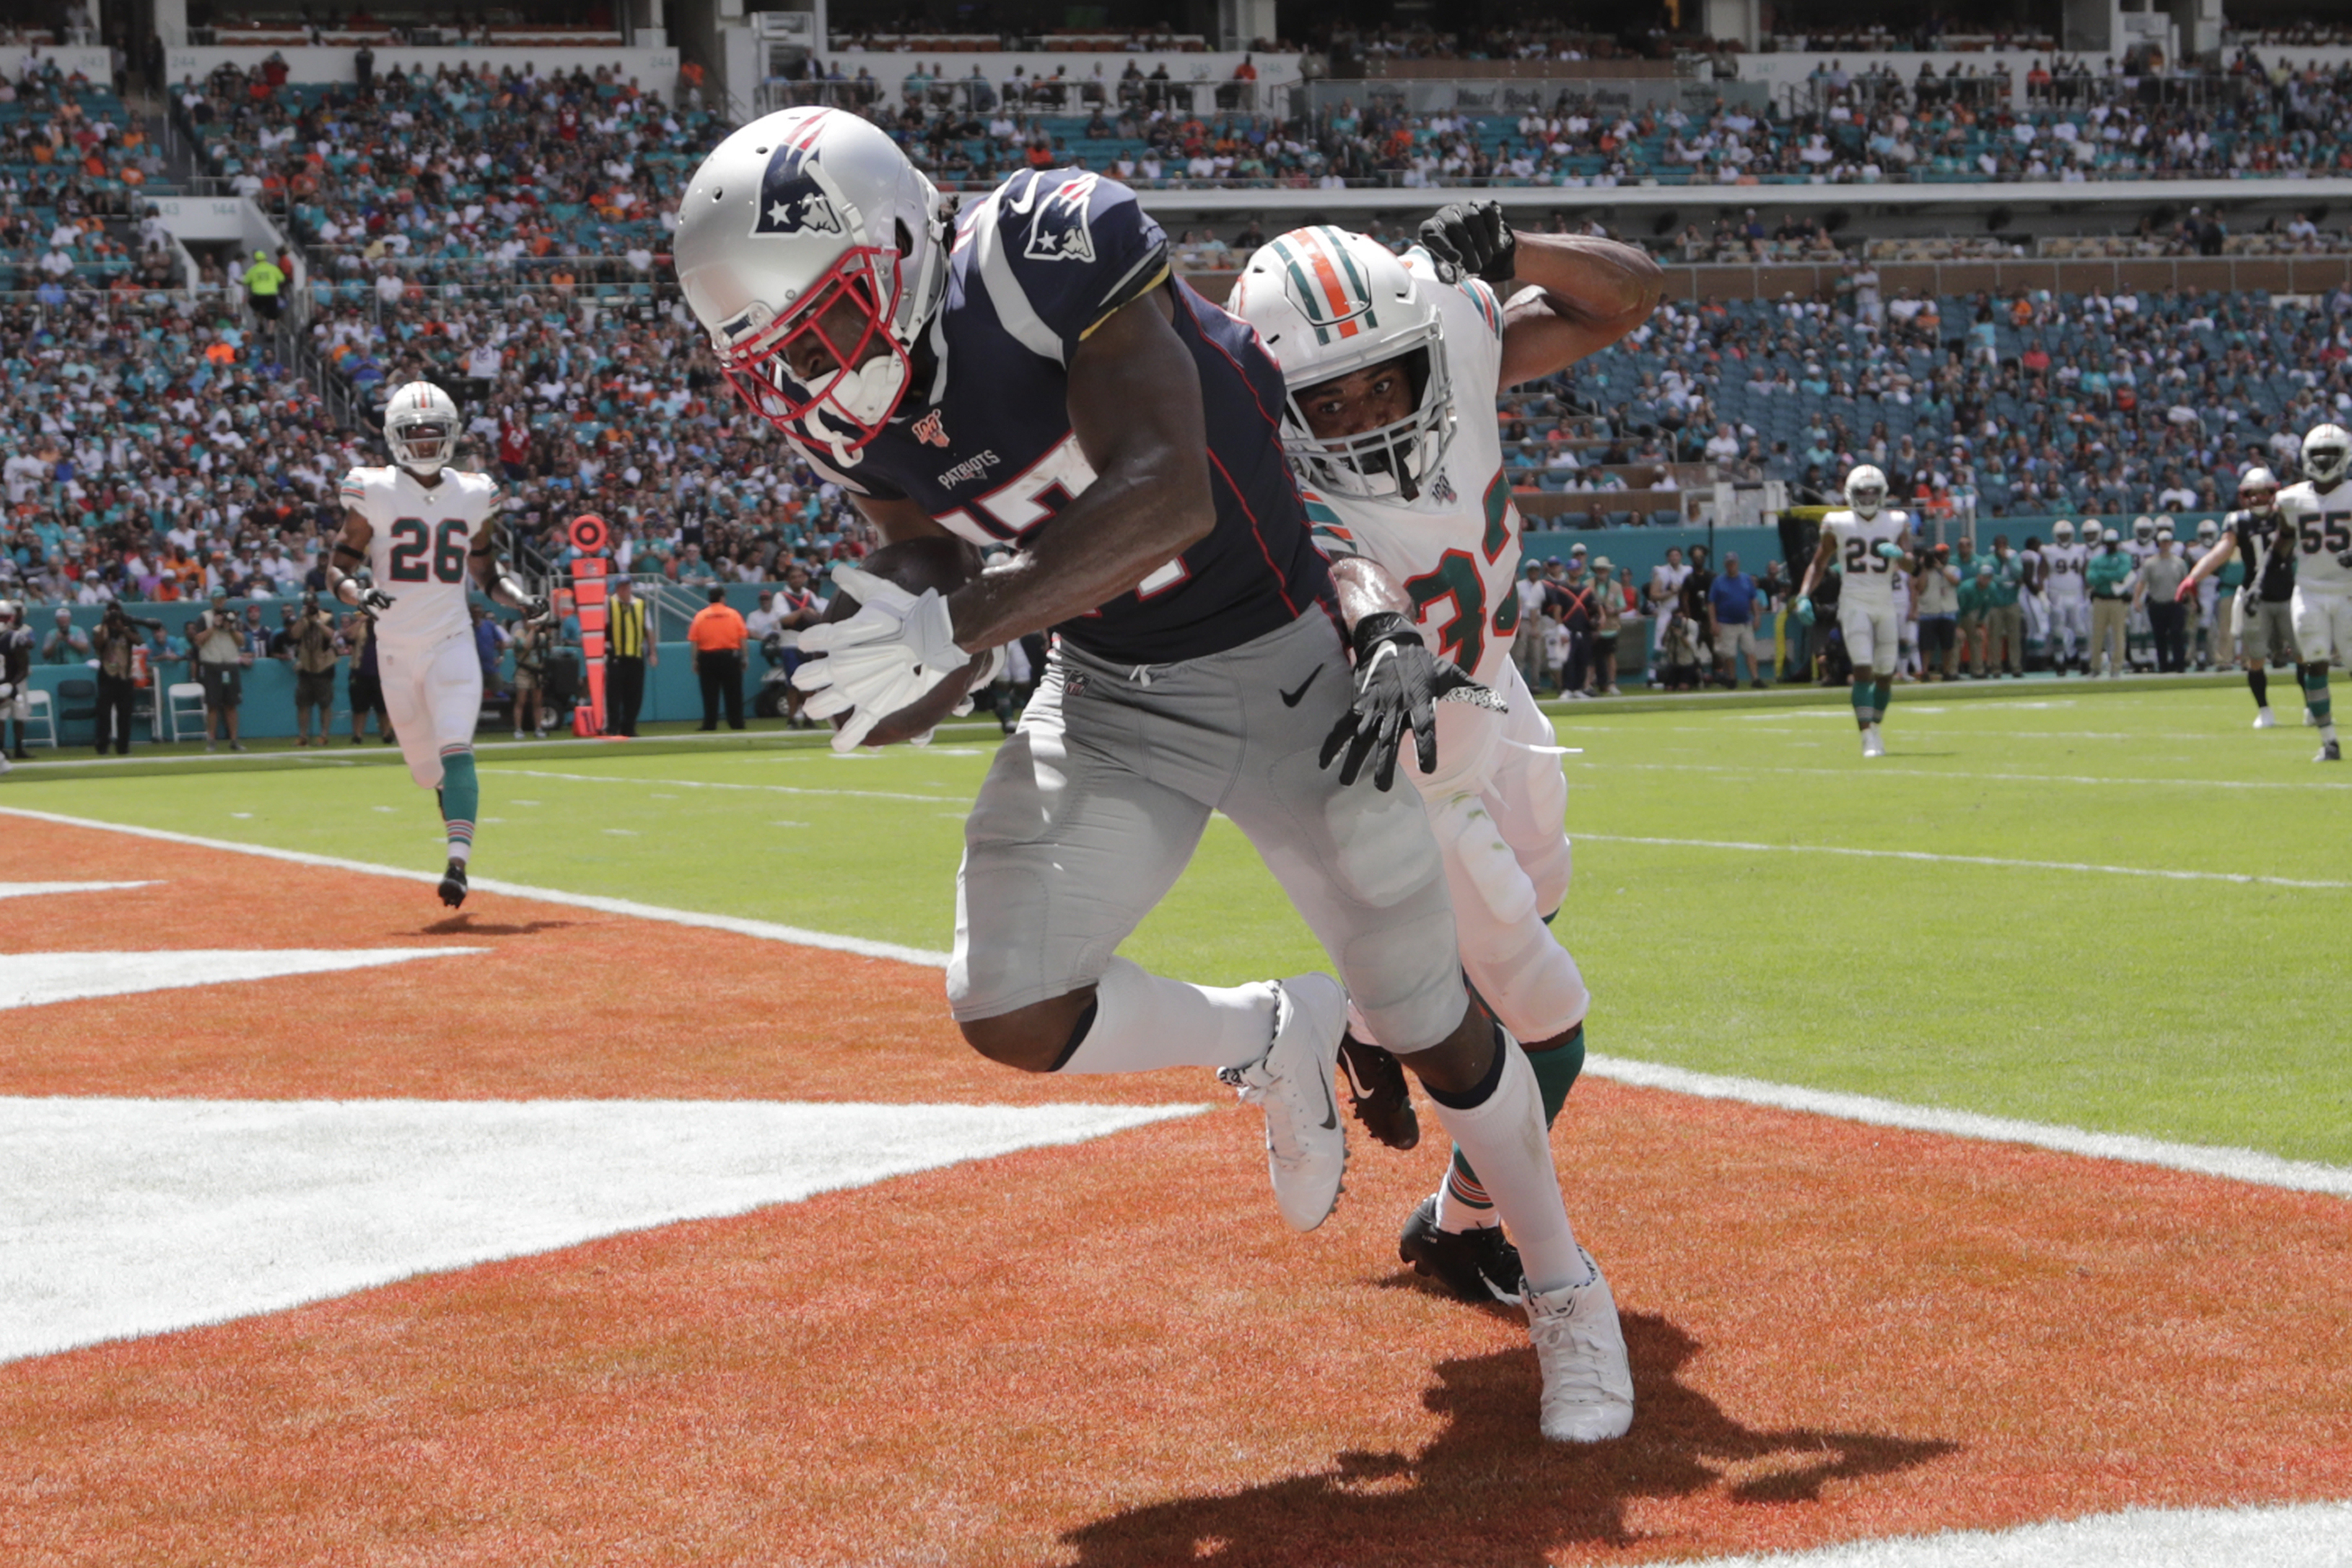 Newcomer Brown scores as Patriots beat Dolphins 43-0